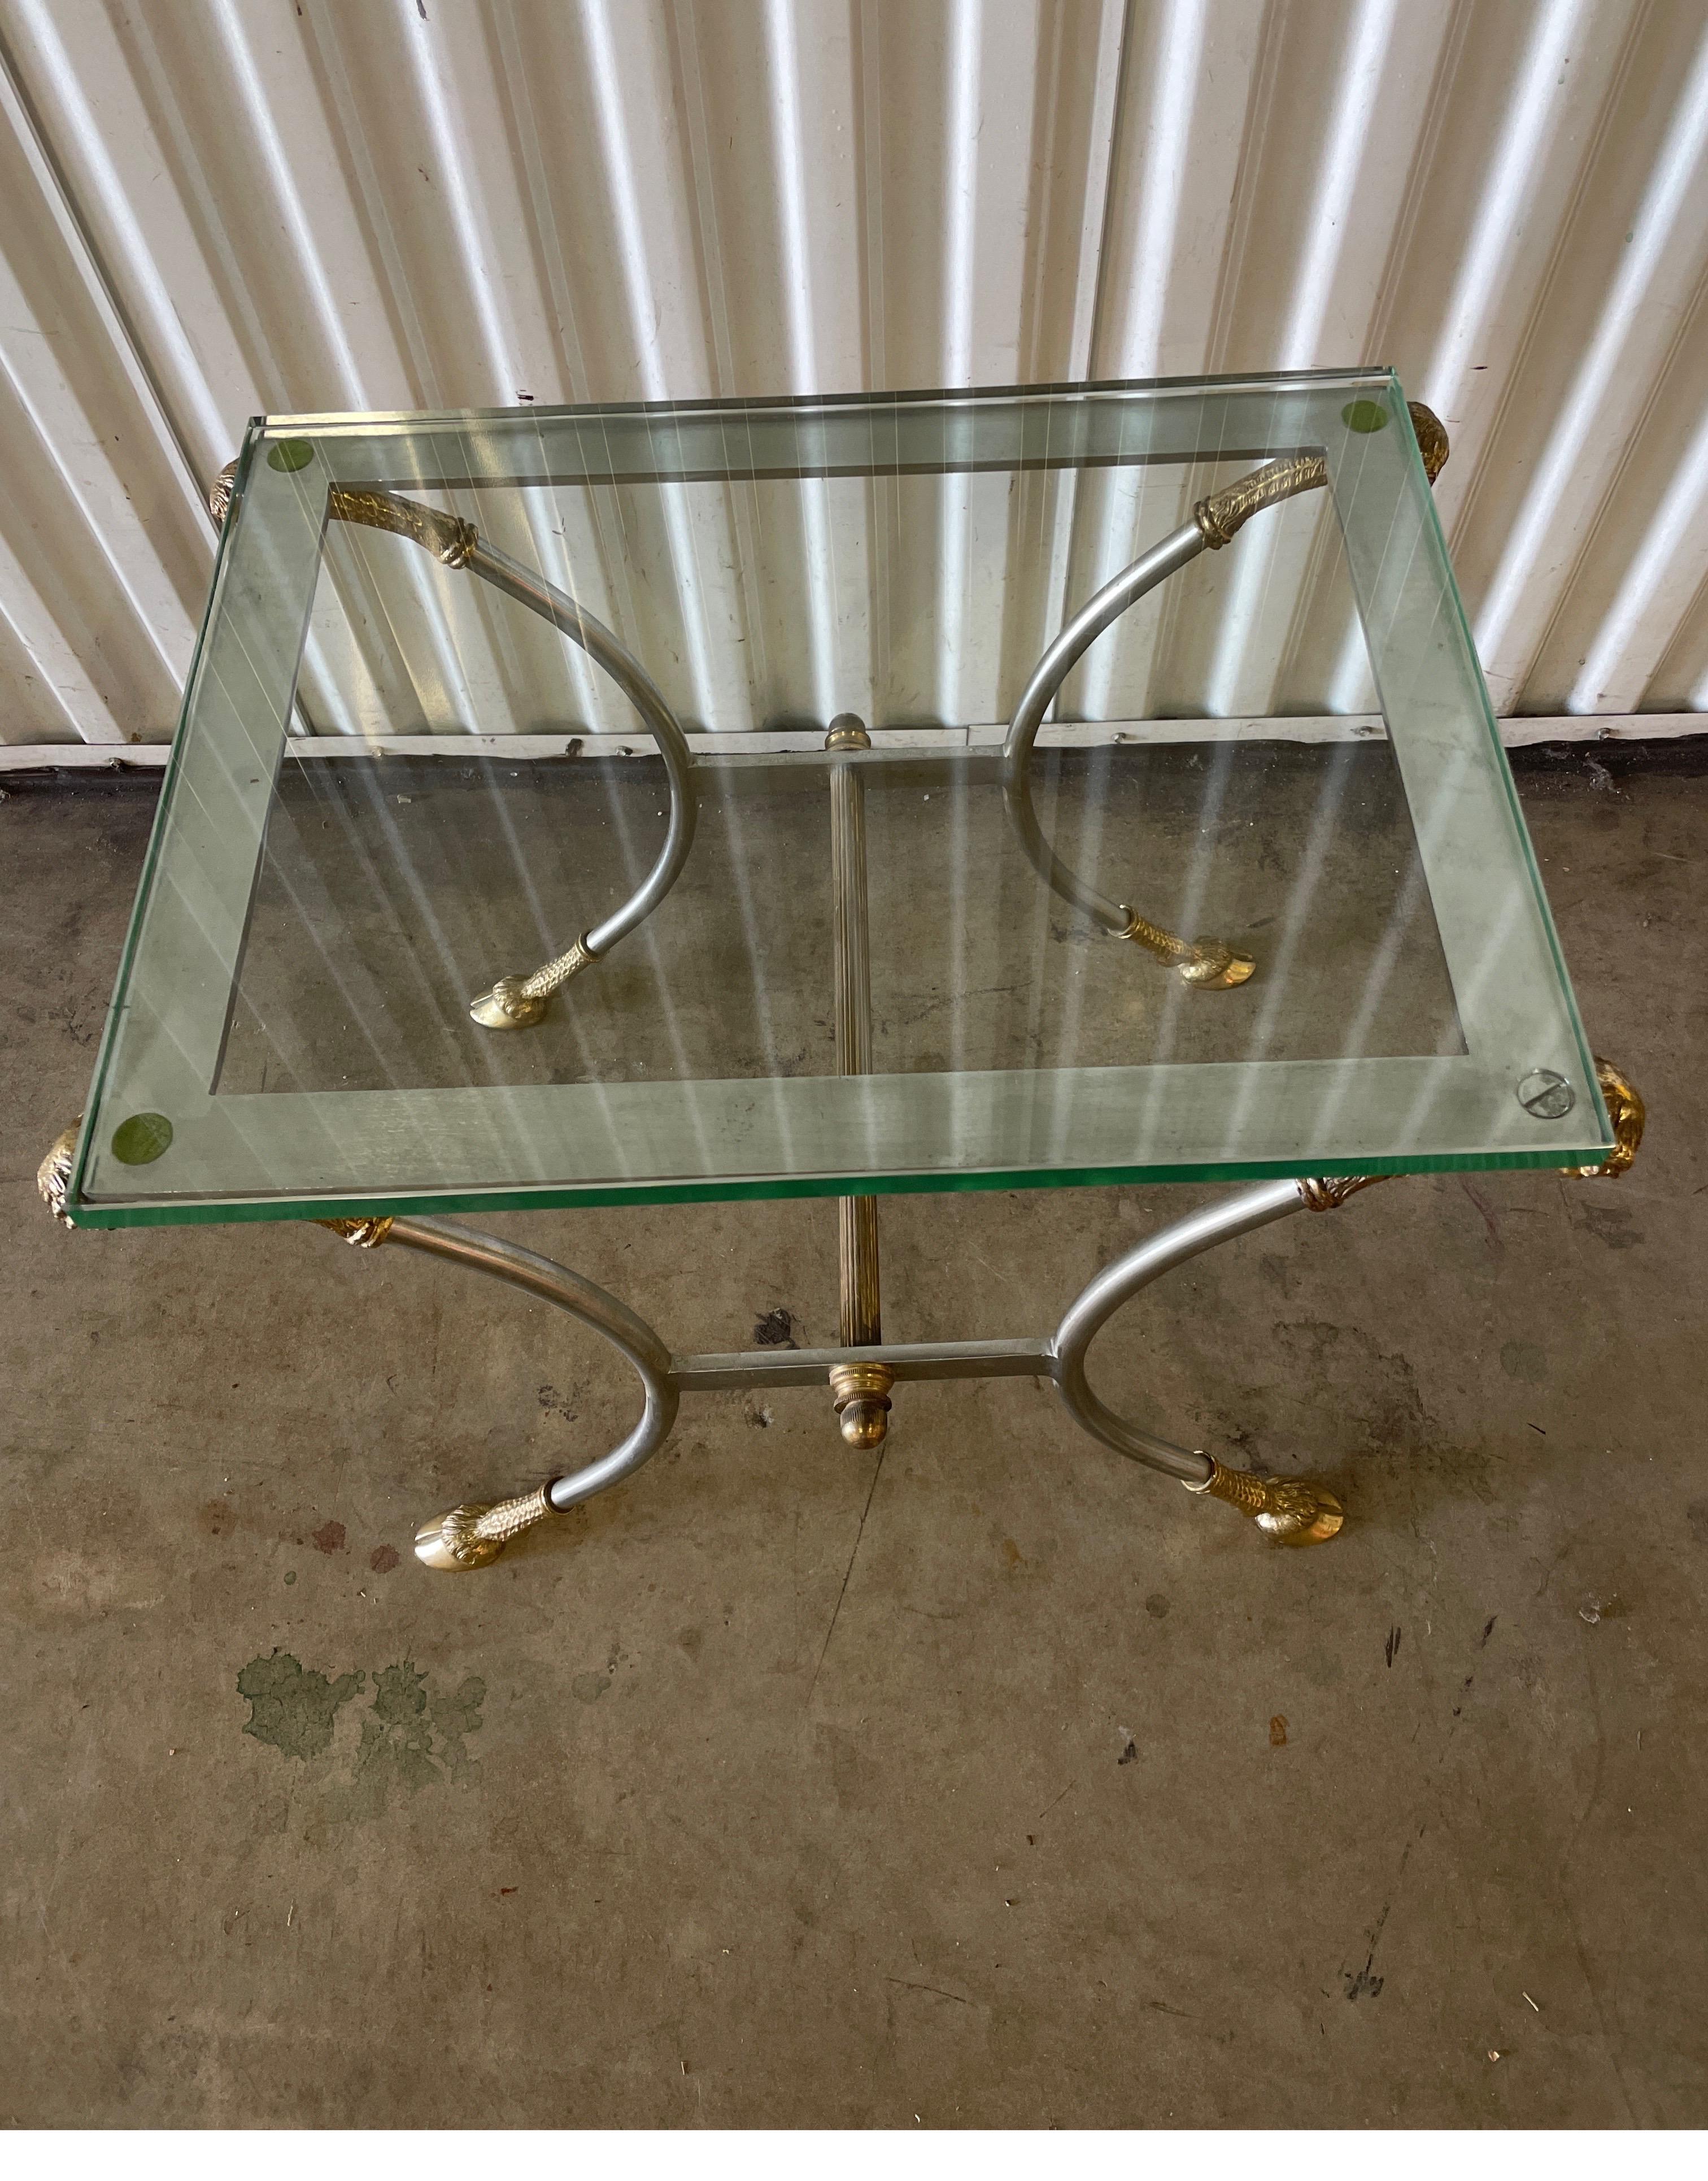 Vintage Neoclassical Ram's Head and Hoof side table by Jansen. This polished steel & brass table has a thick glass top. Perfect little drinks table.
A classic gem.